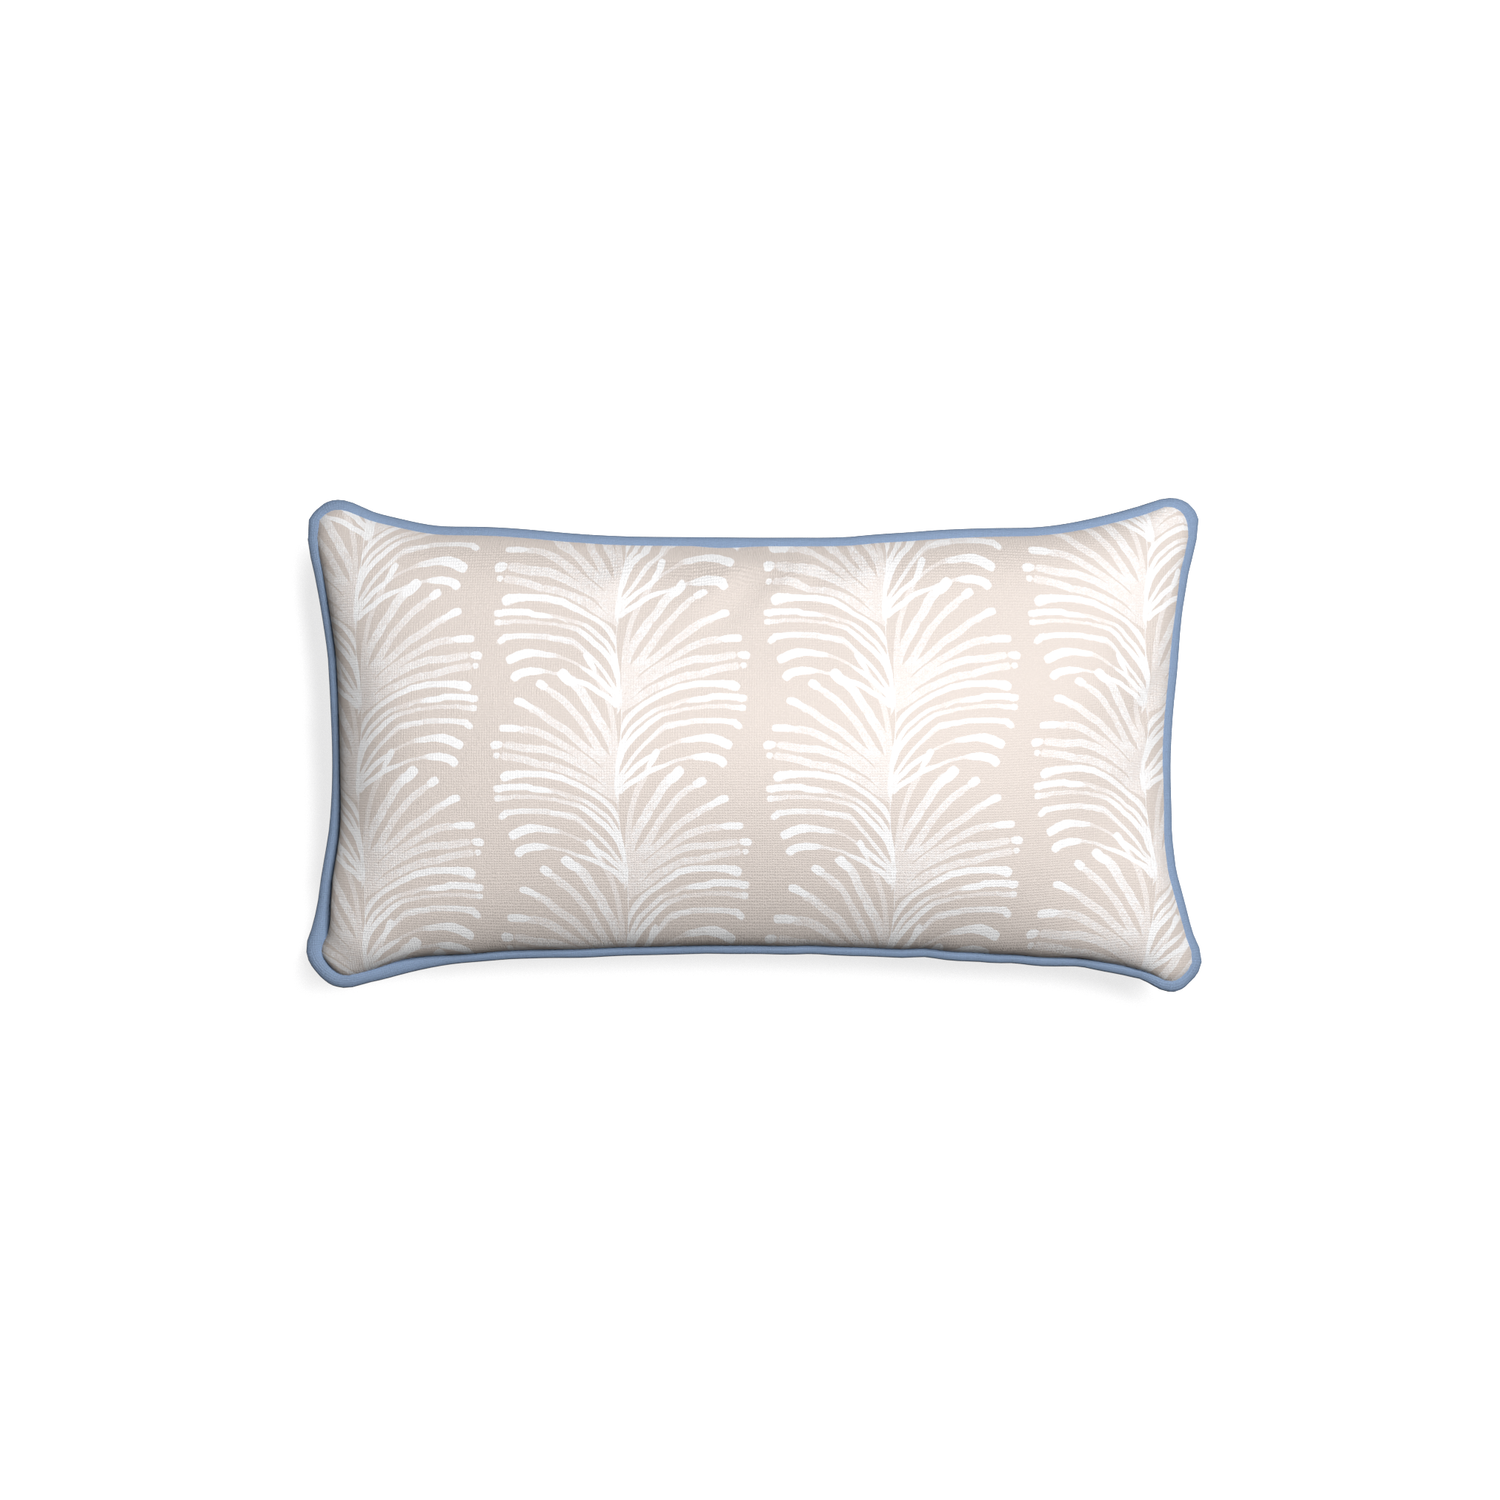 Petite-lumbar emma sand custom sand colored botanical stripepillow with sky piping on white background